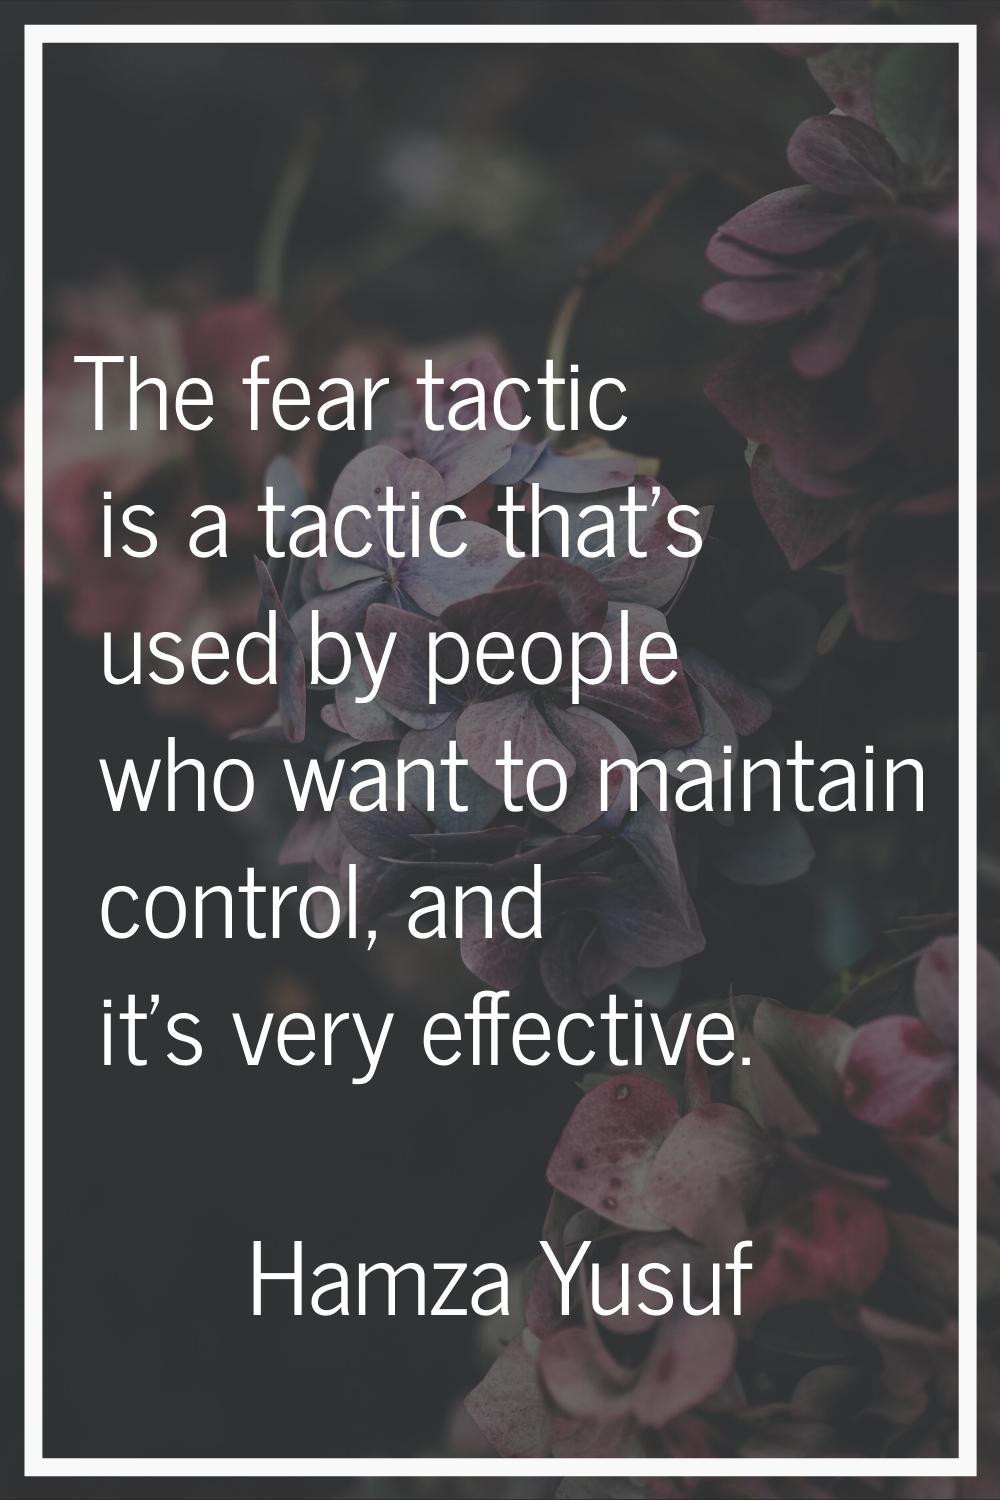 The fear tactic is a tactic that's used by people who want to maintain control, and it's very effec